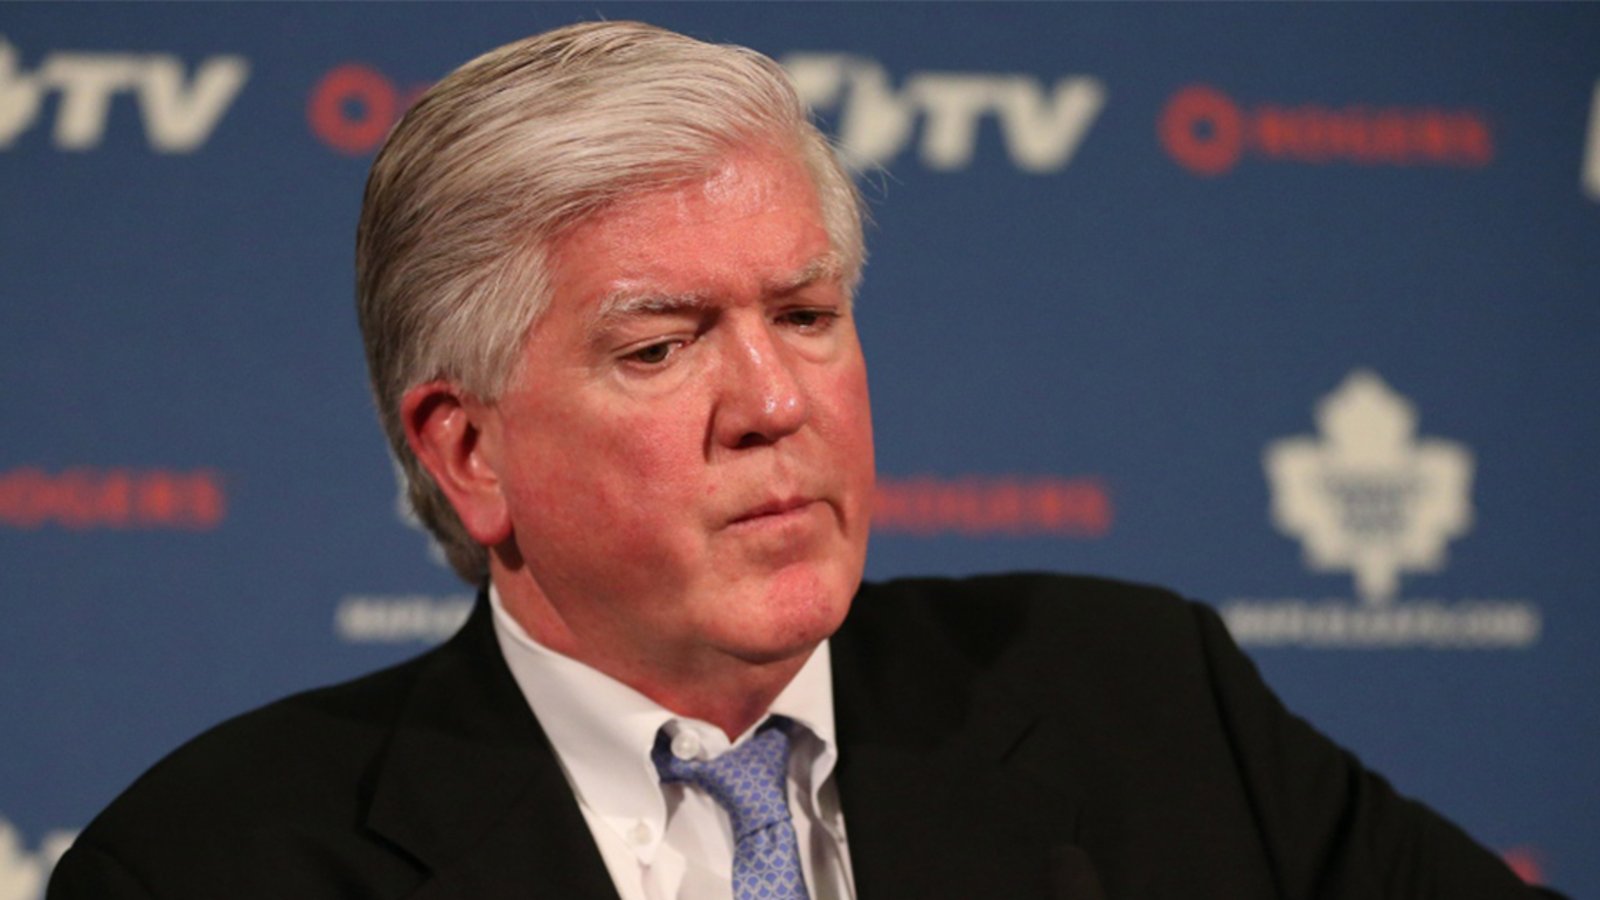 Former Leafs GM Brian Burke makes special visit to team’s dressing room